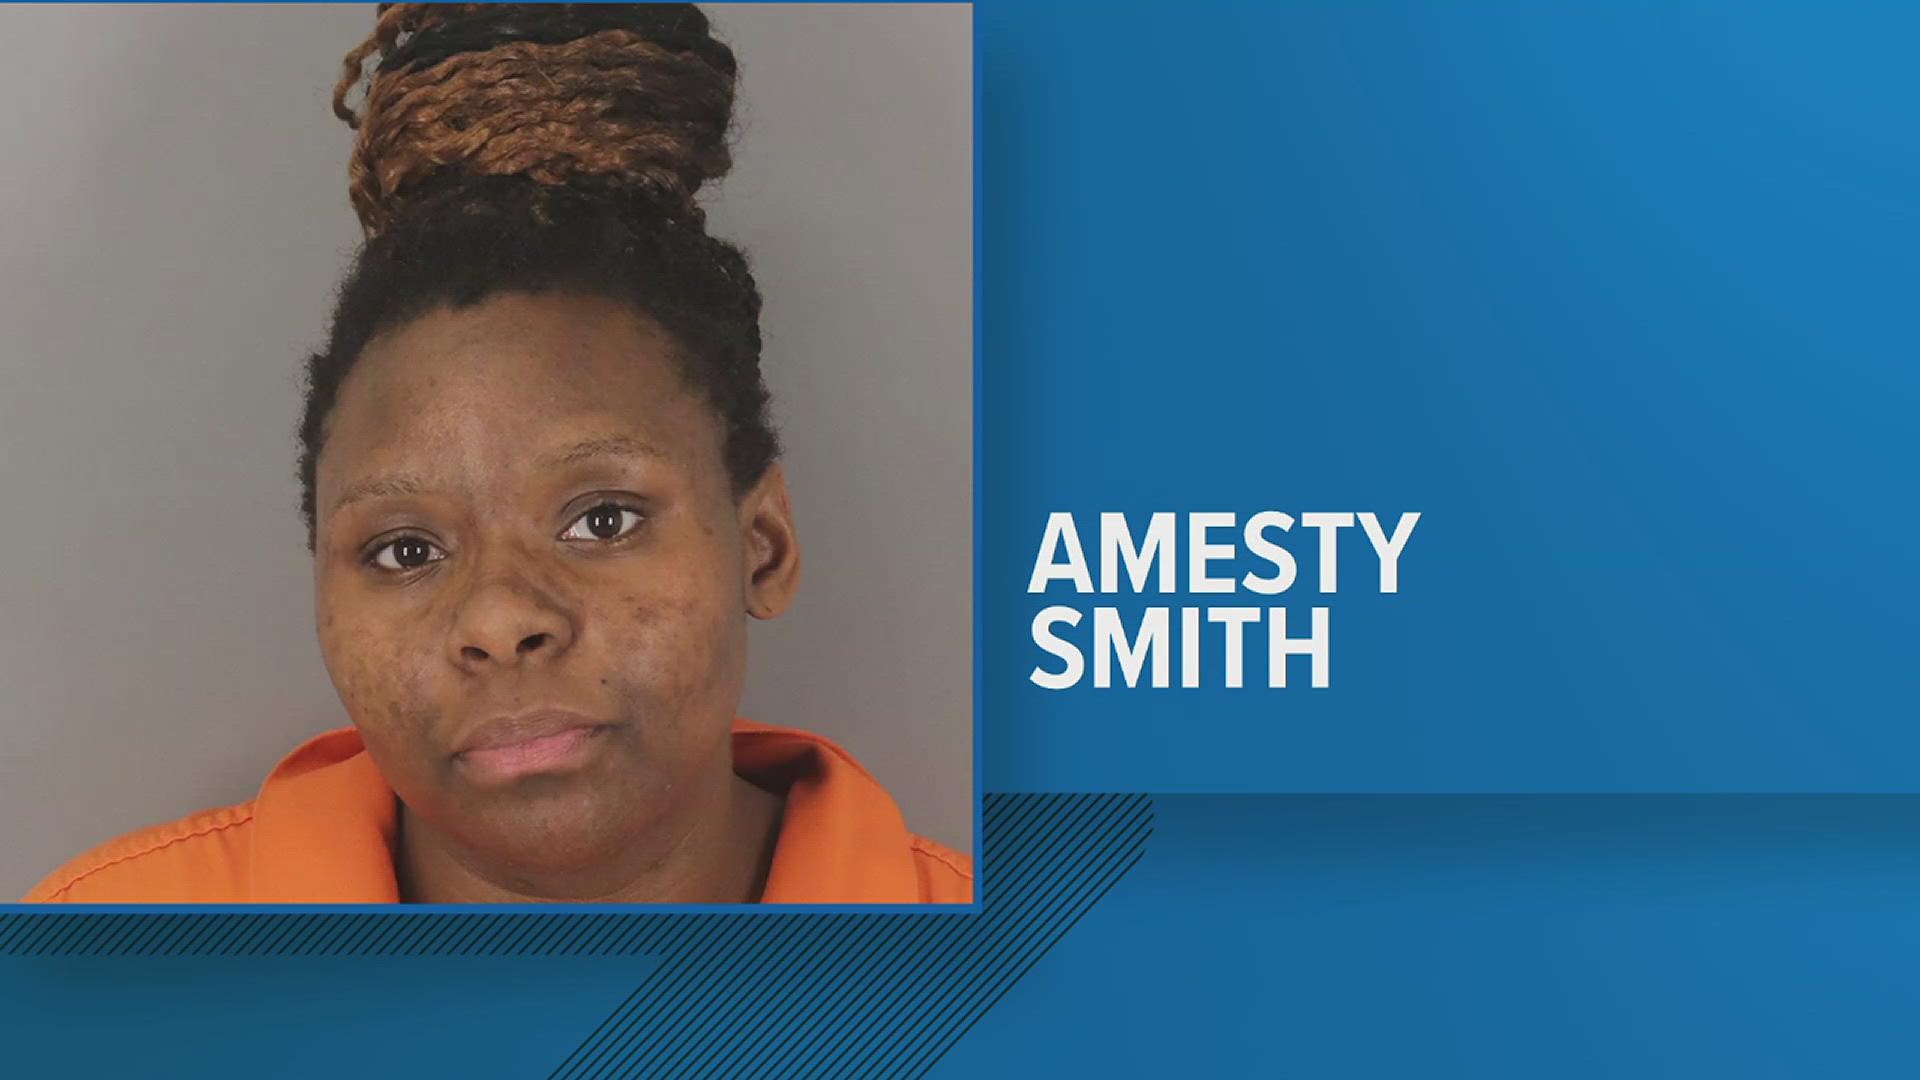 Amesty Smith, 26, was found guilty in the 2019 stabbing death of 24-year-old Gerald Taylor. The punishment phase begins Friday morning.